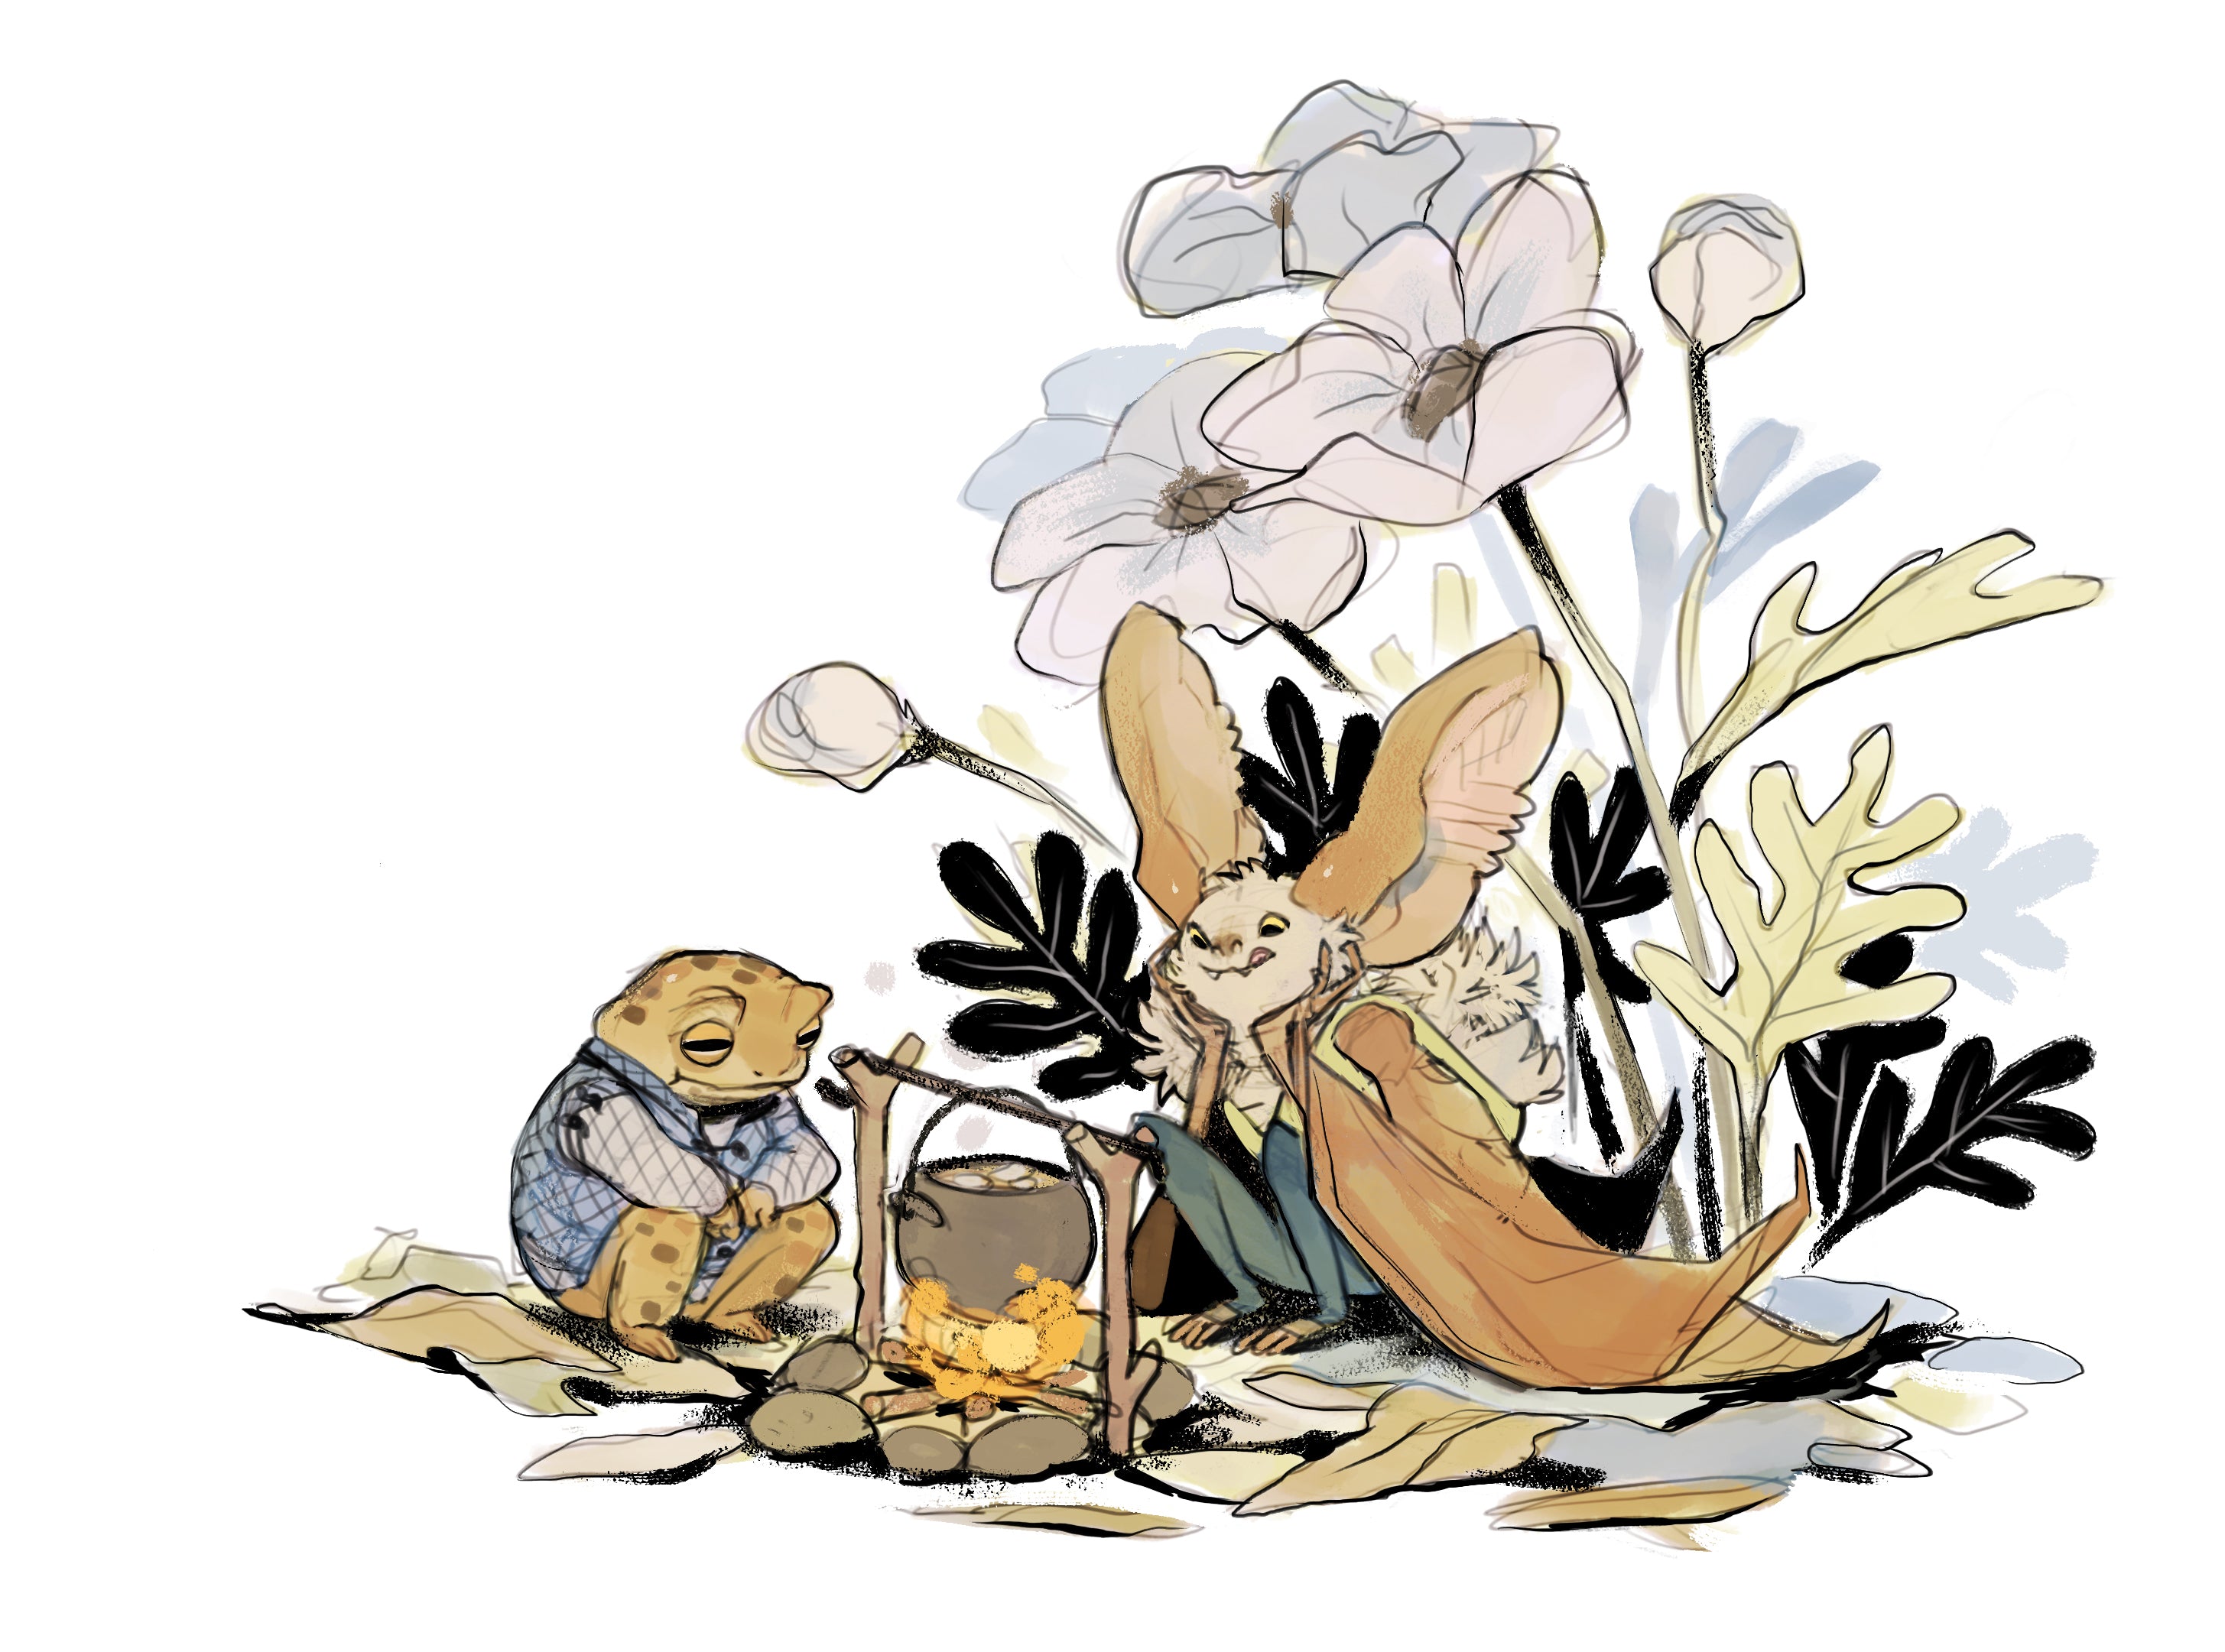 A toad and bat stare cosily into a bubbling pot atop a campfire. The toad wears a warm blue gambeson, and the bat has a tight green flight suit over their chest and legs. In the background pale blue flowers and foliage bloom.